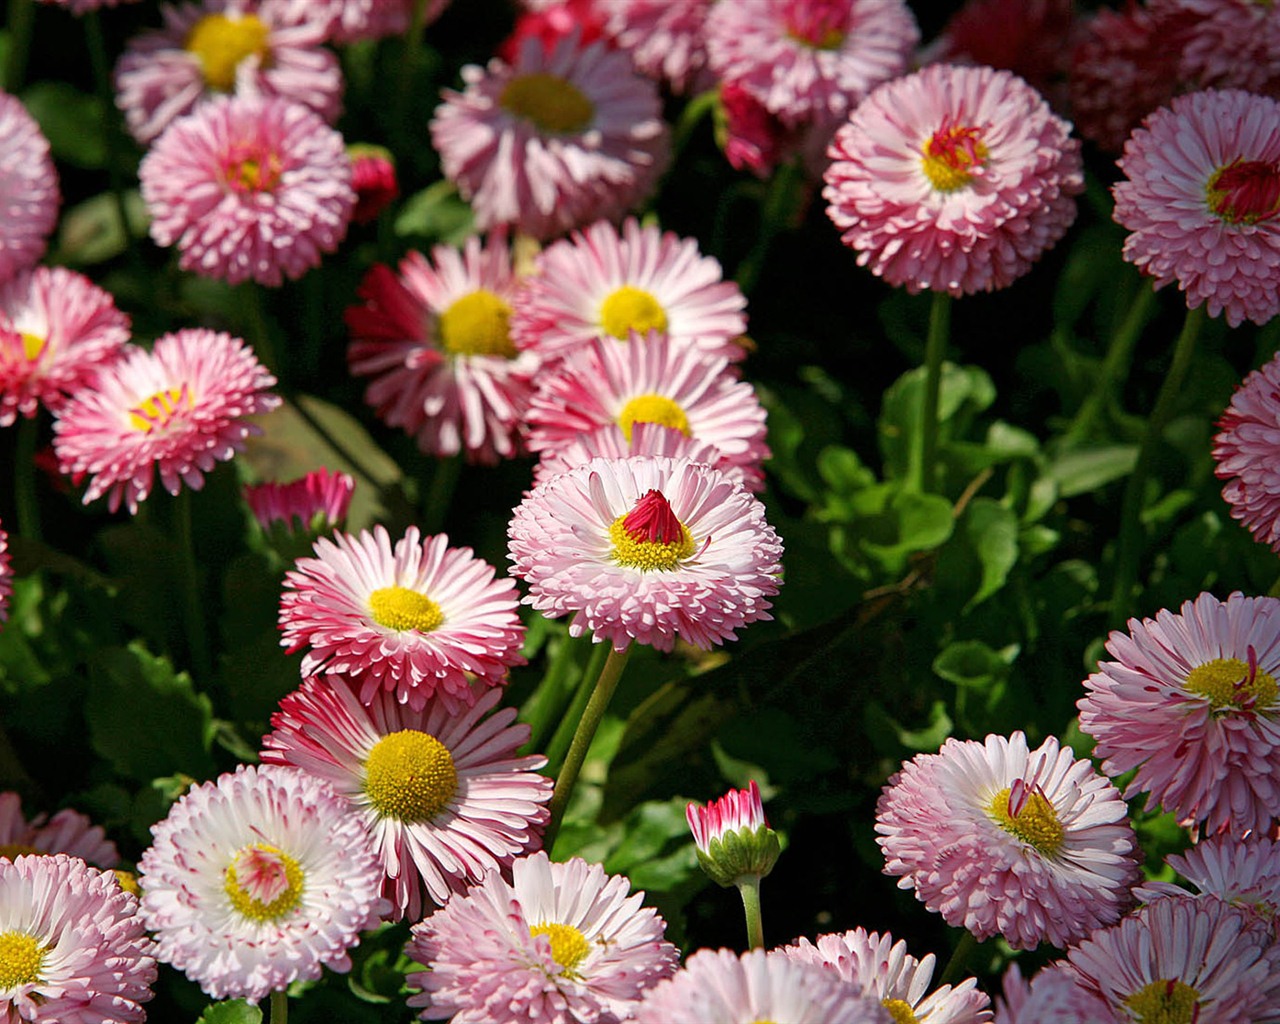 Daisies flowers close-up HD wallpapers #17 - 1280x1024